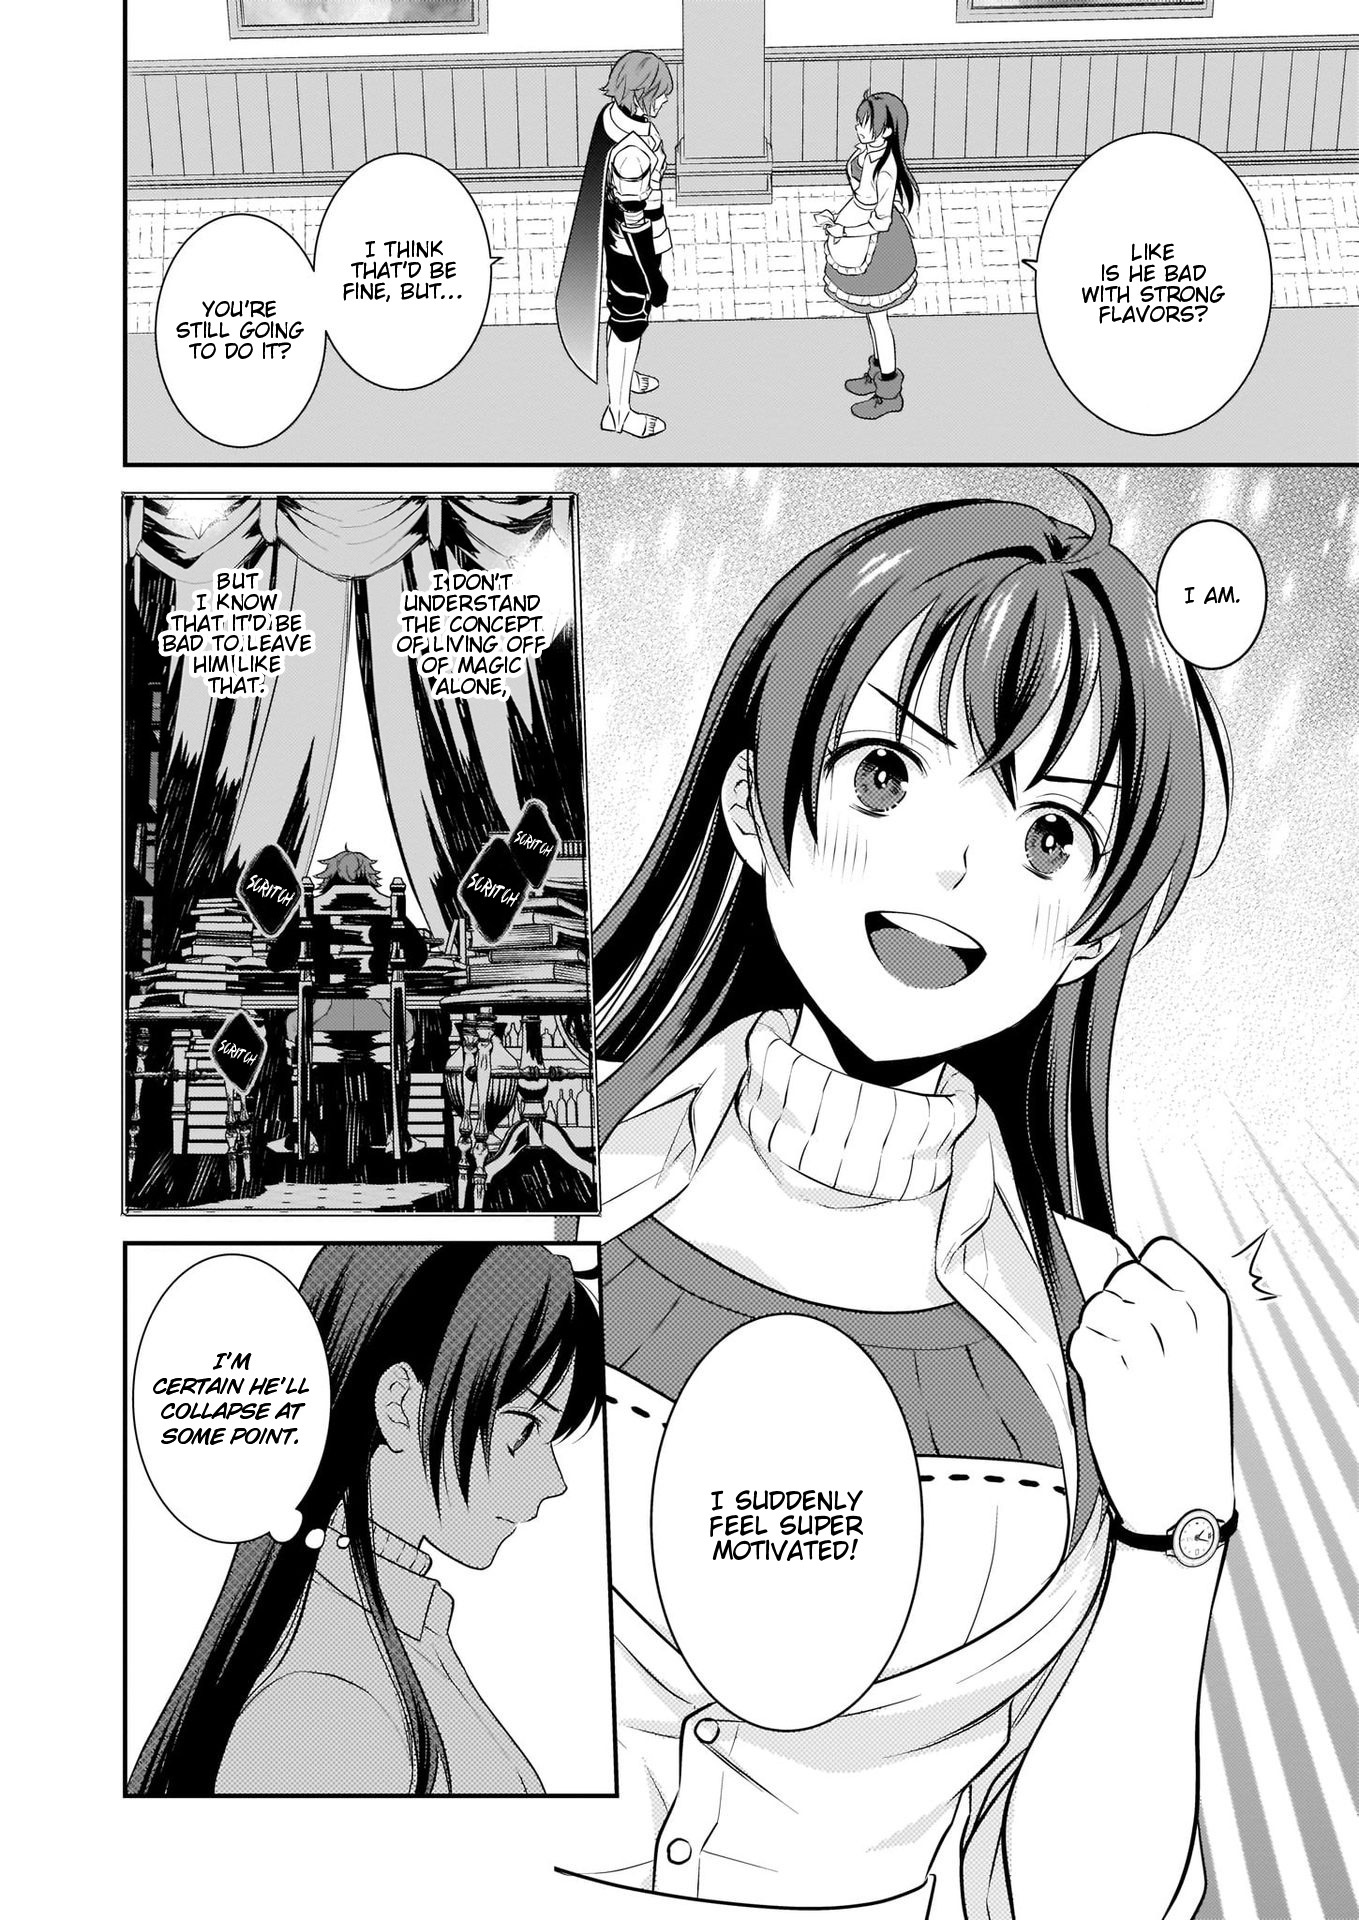 The Lunchlady is a Saintess! ~Warm Recipies from the Girl from Another World~ ch.1